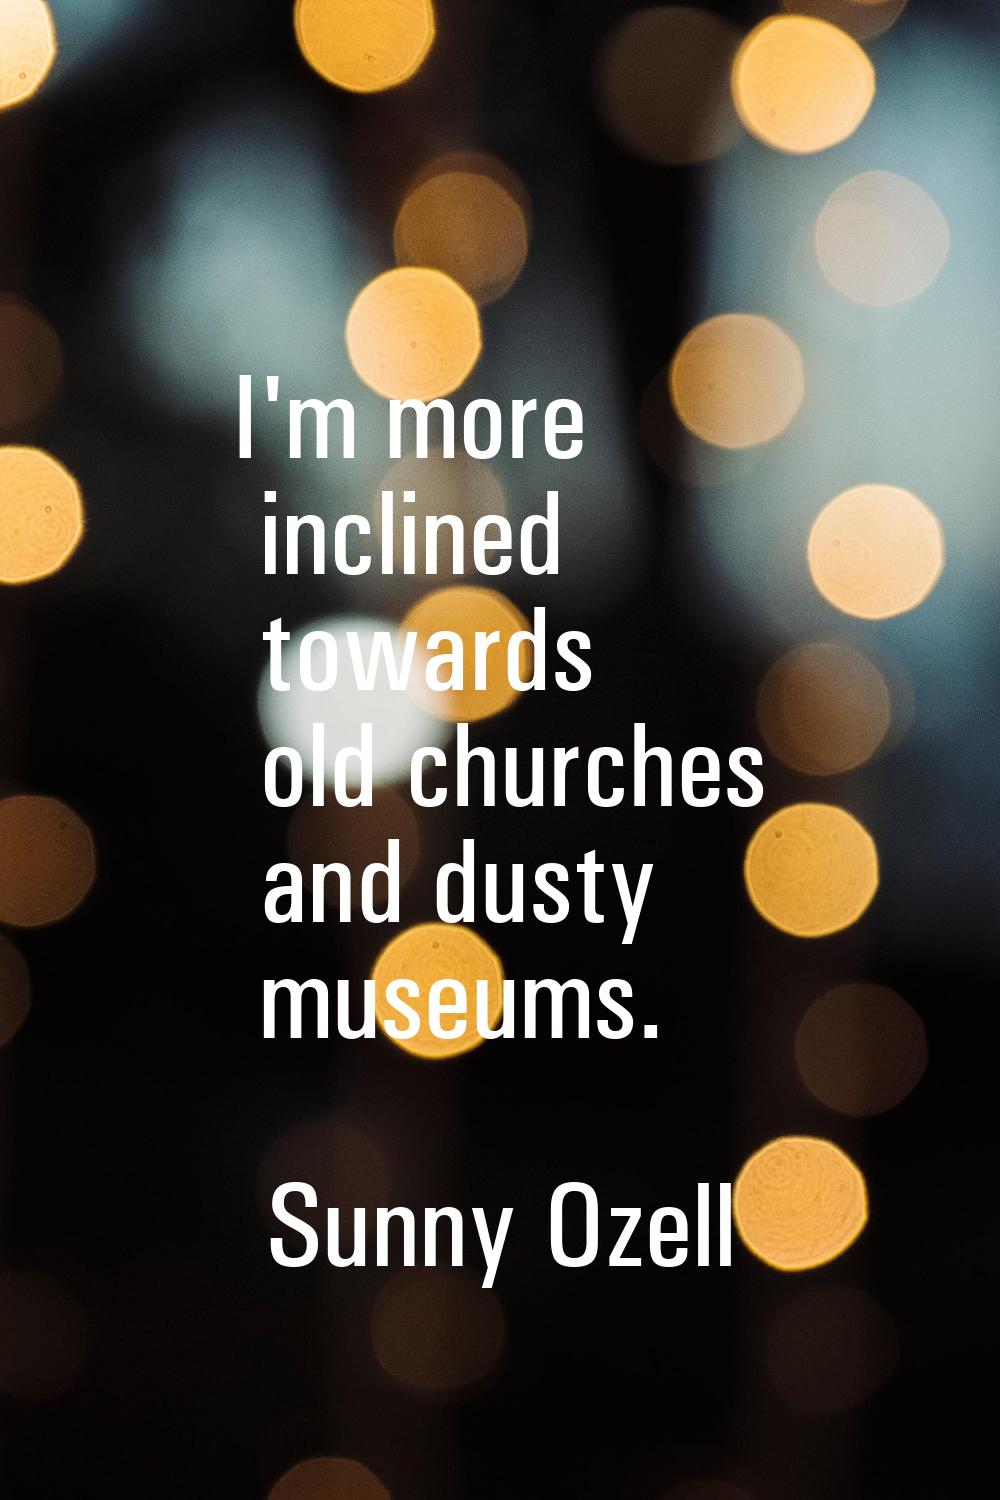 I'm more inclined towards old churches and dusty museums.